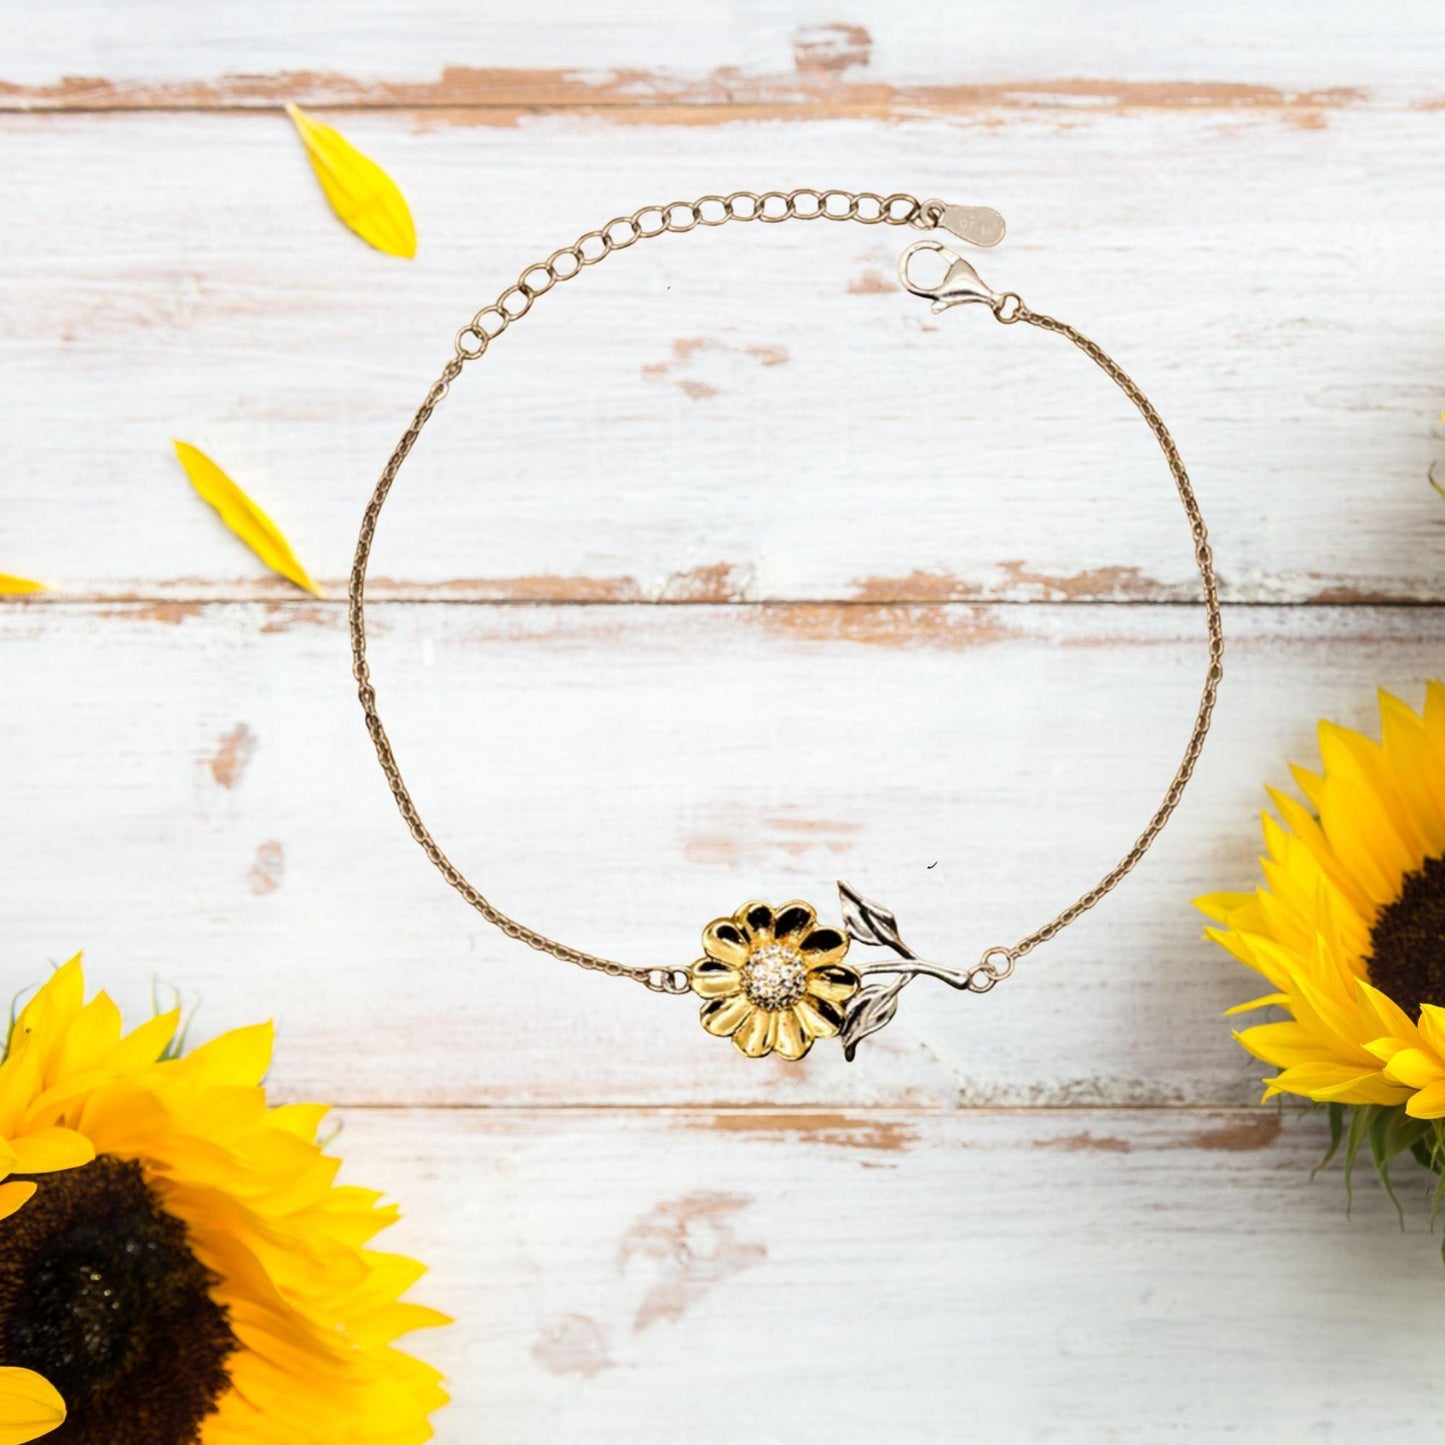 Godmother Gifts, To My Godmother Remember, you will never lose. You will either WIN or LEARN, Keepsake Sunflower Bracelet For Godmother Card, Birthday Christmas Gifts Ideas For Godmother X-mas Gifts